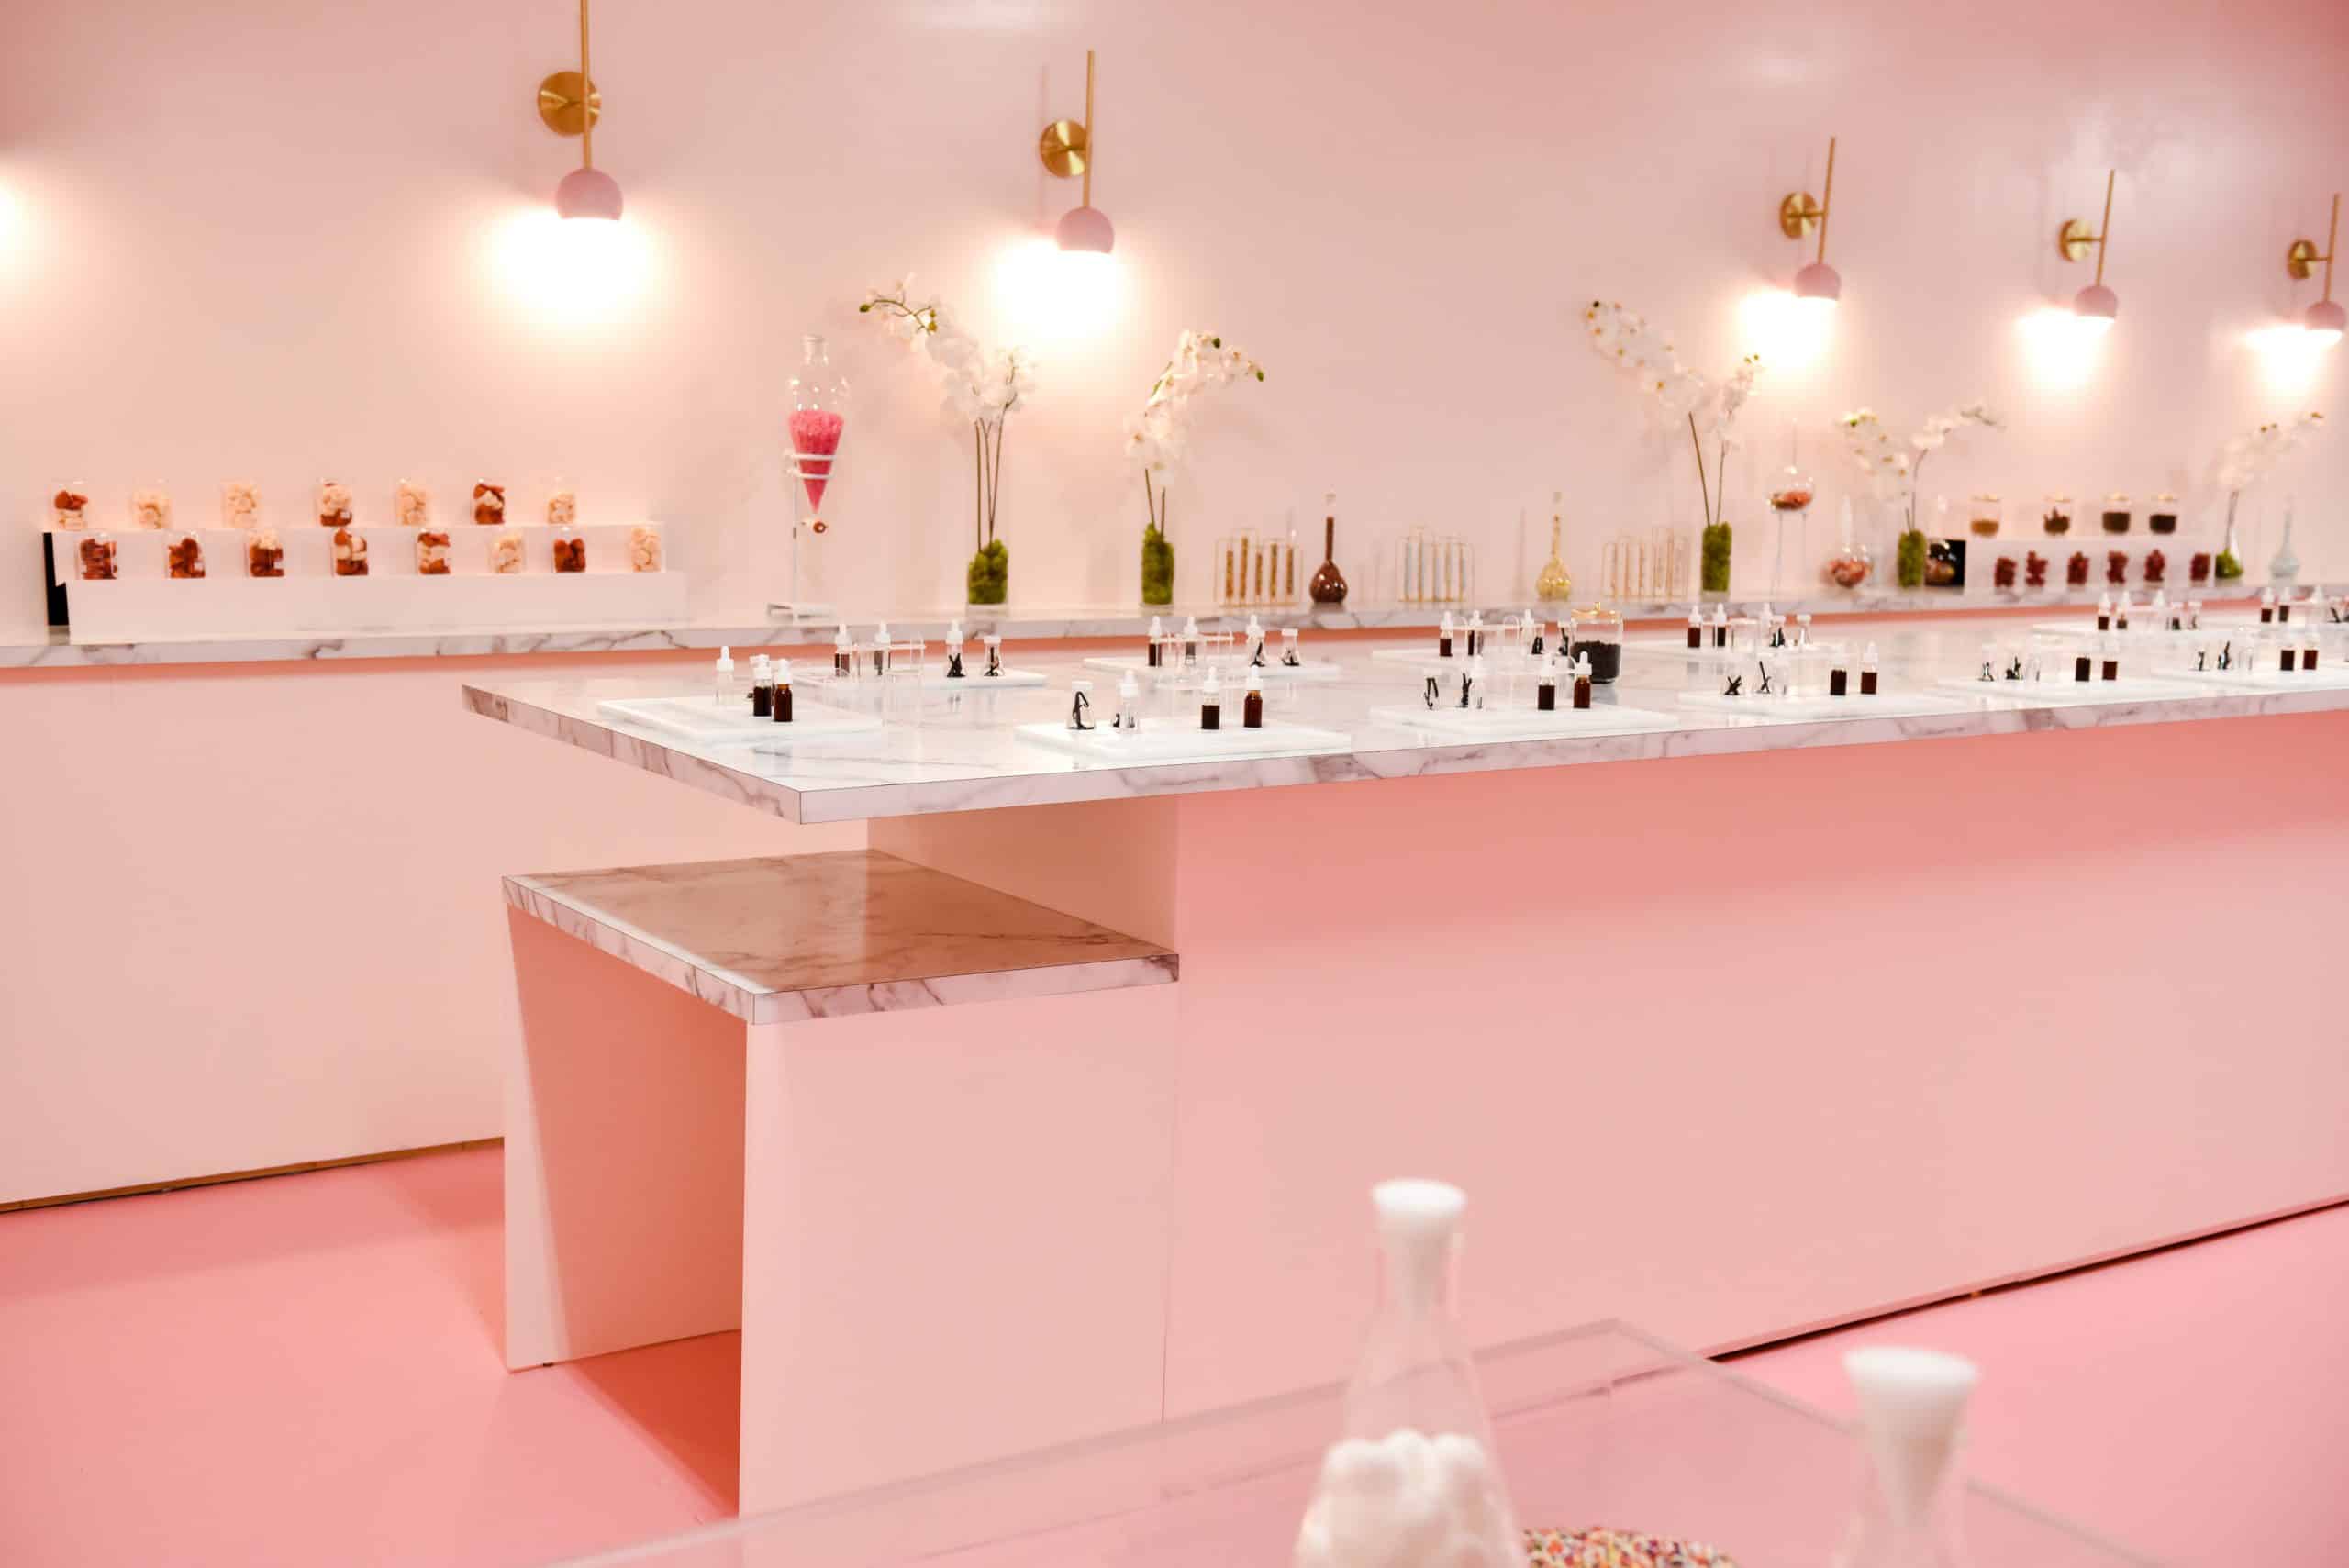 Museum of Ice Cream Returns to NYC with